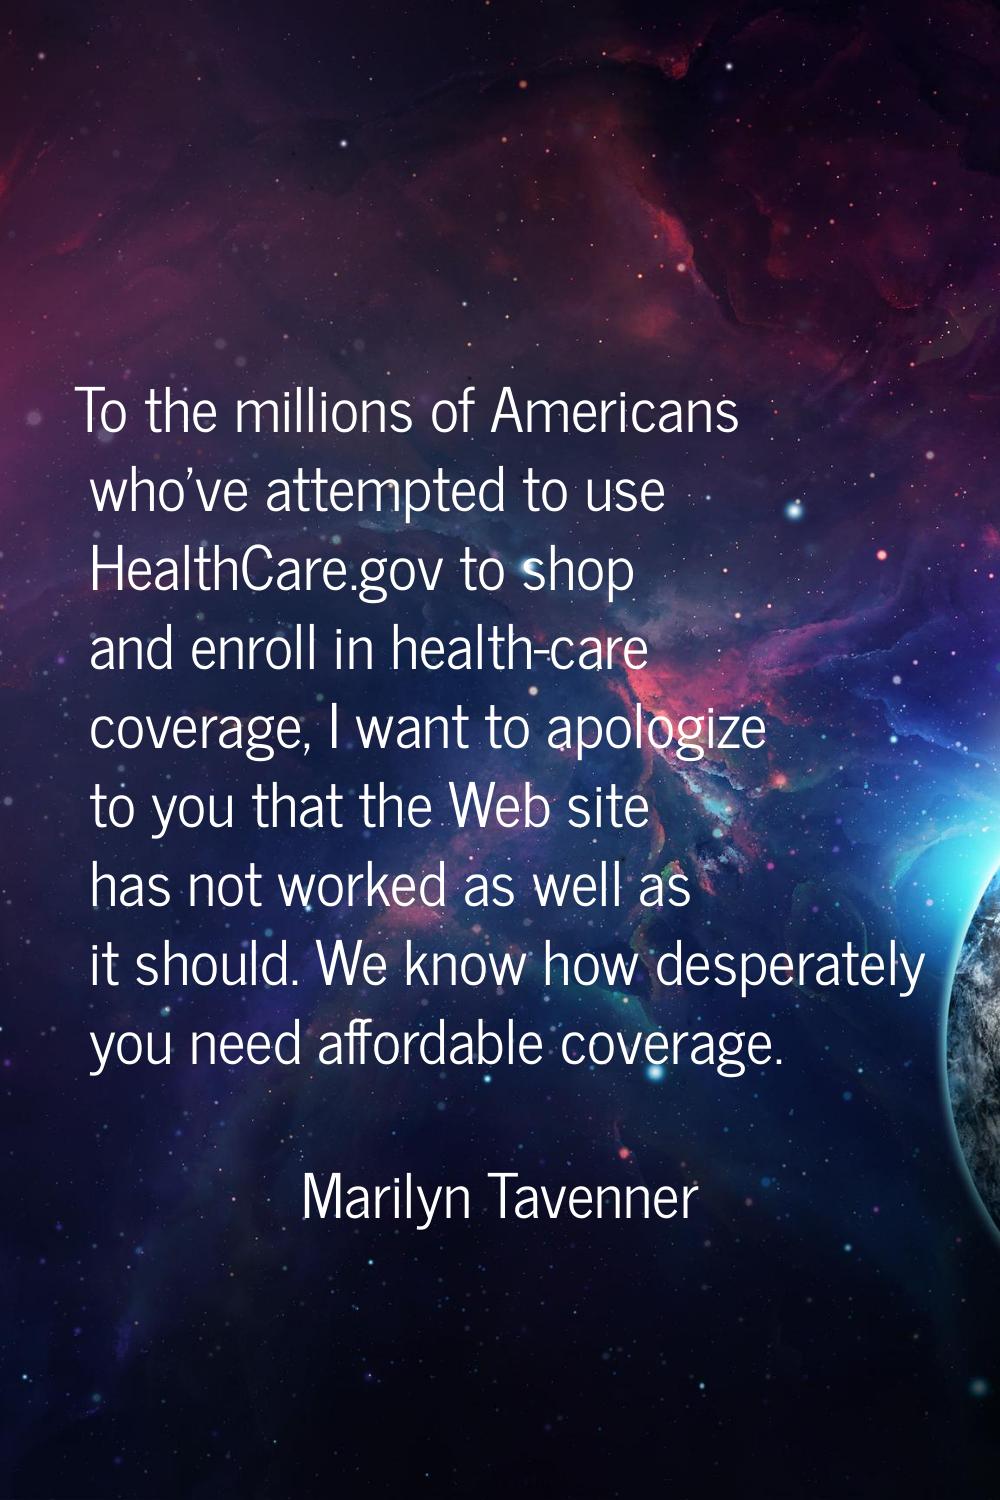 To the millions of Americans who've attempted to use HealthCare.gov to shop and enroll in health-ca